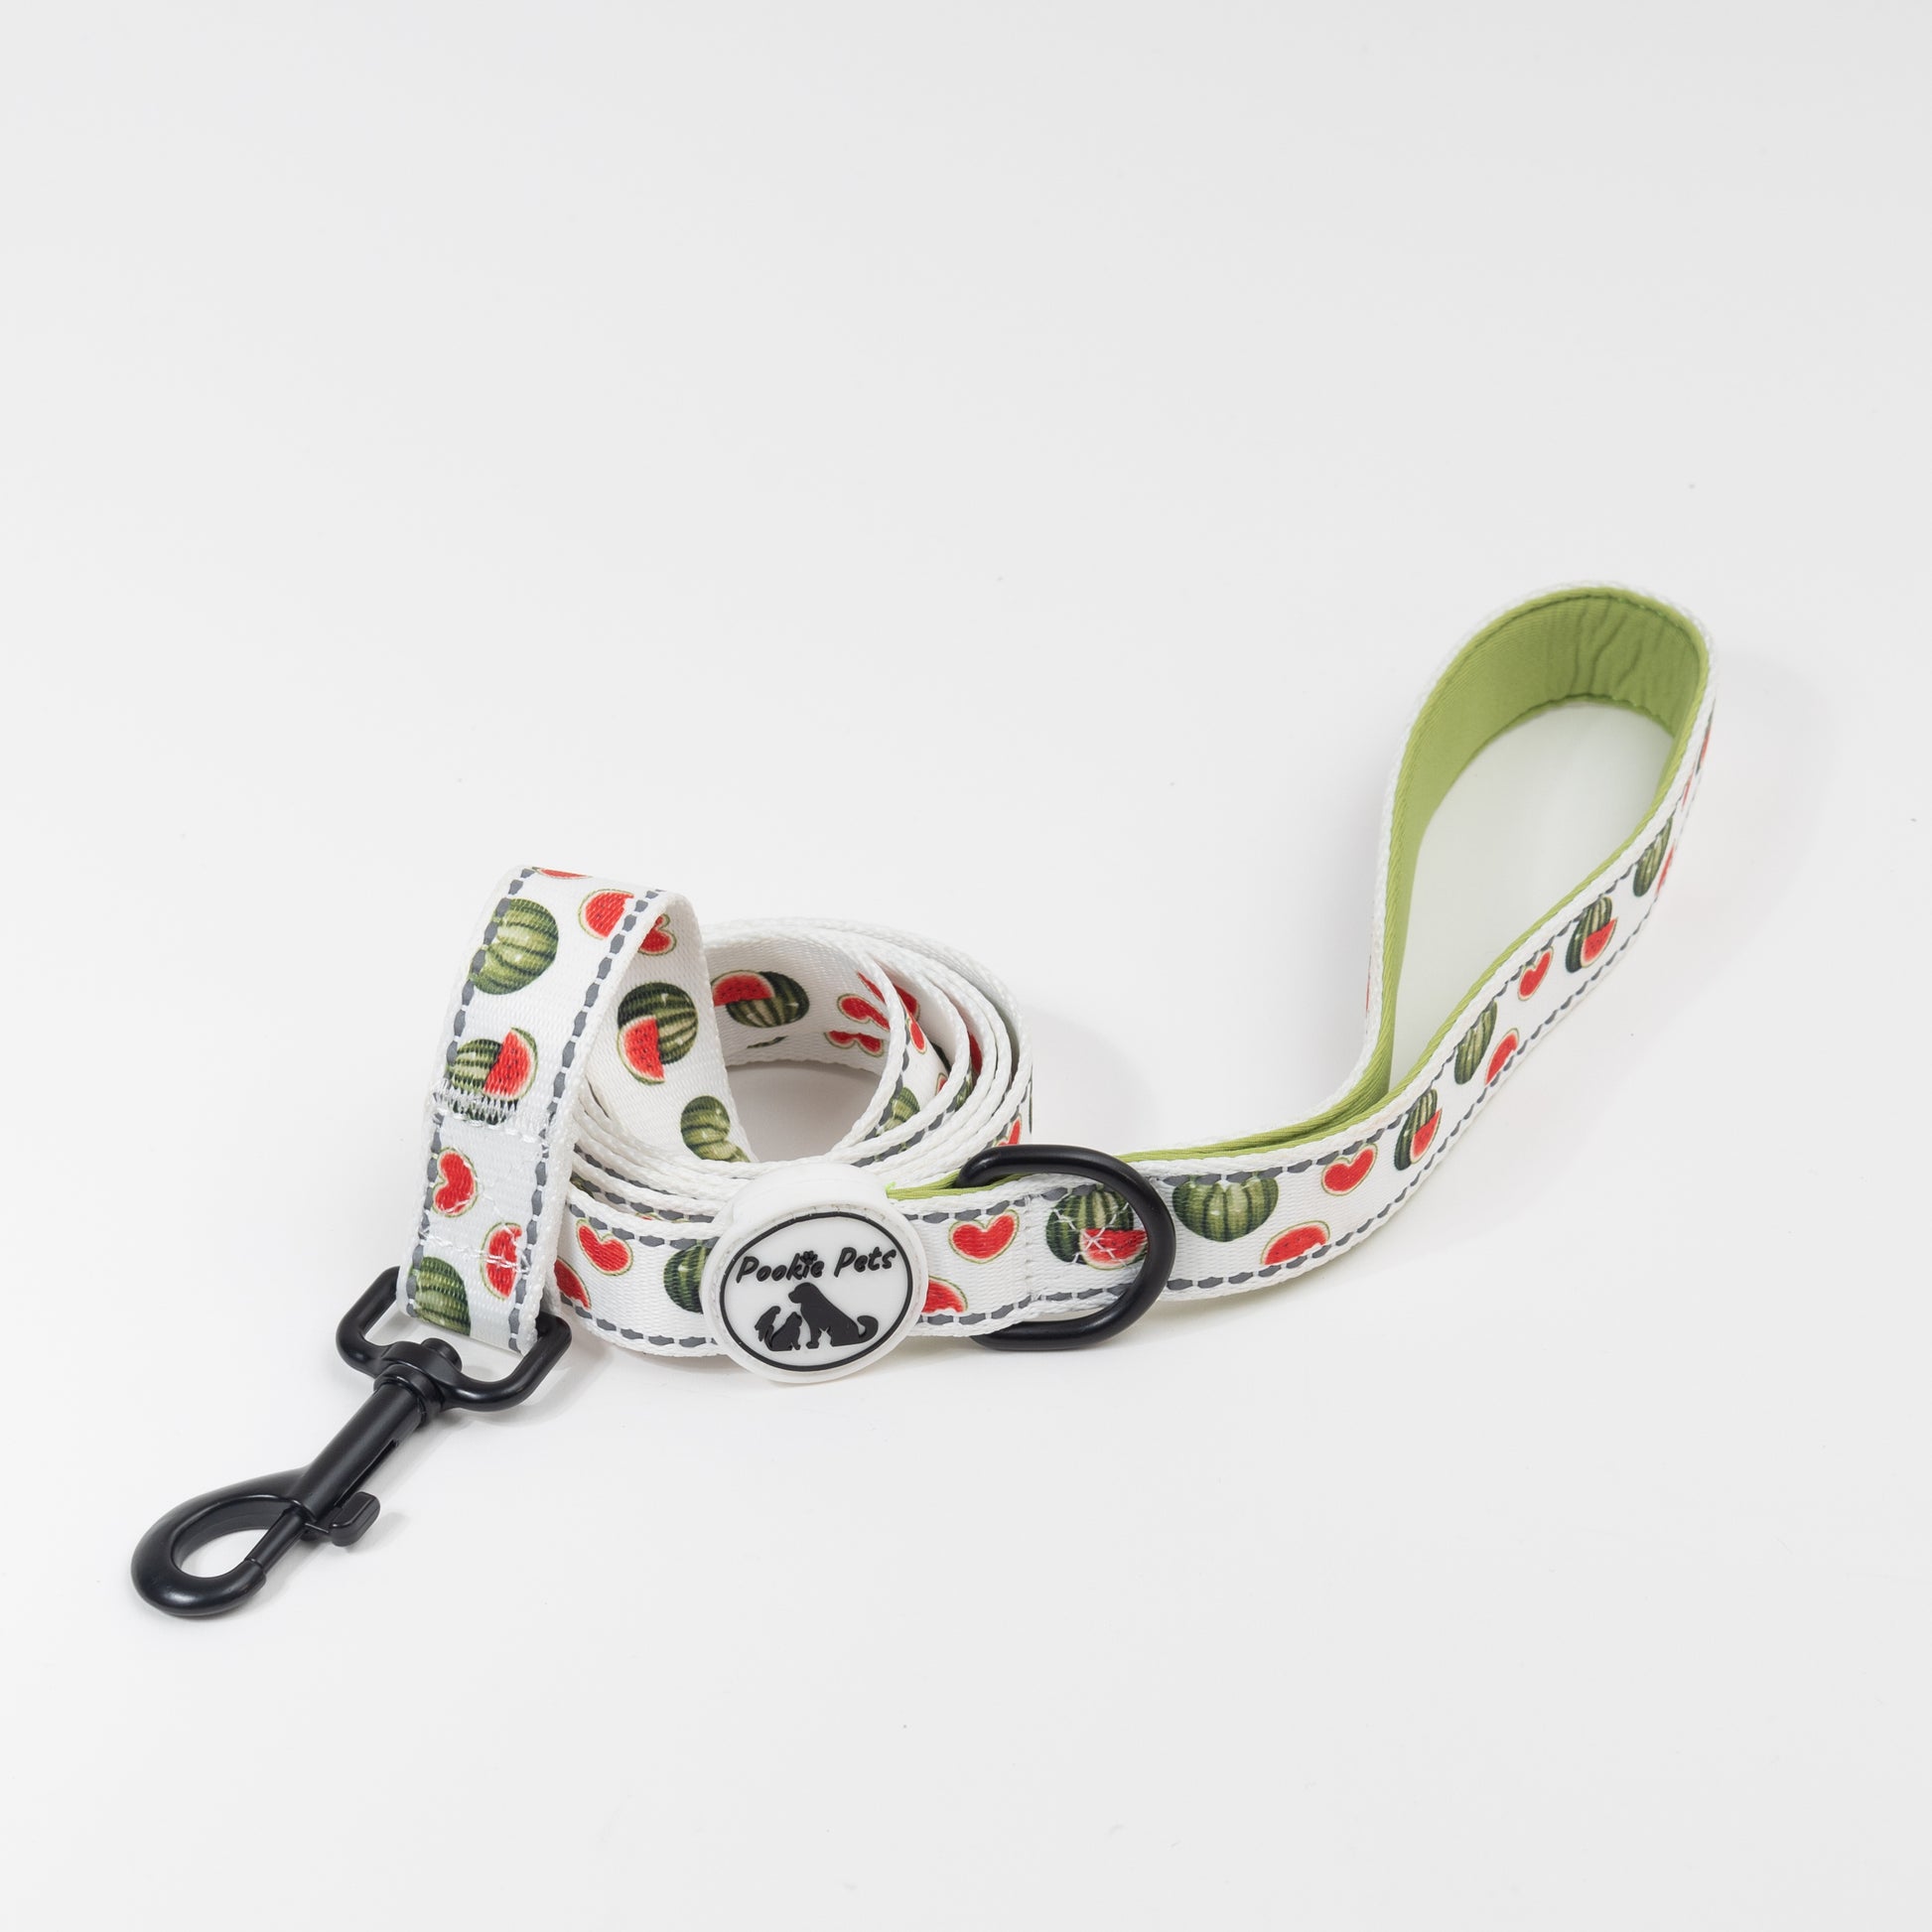 Bright and Cheerful Watermelon Design Leash - Pookie Pets 